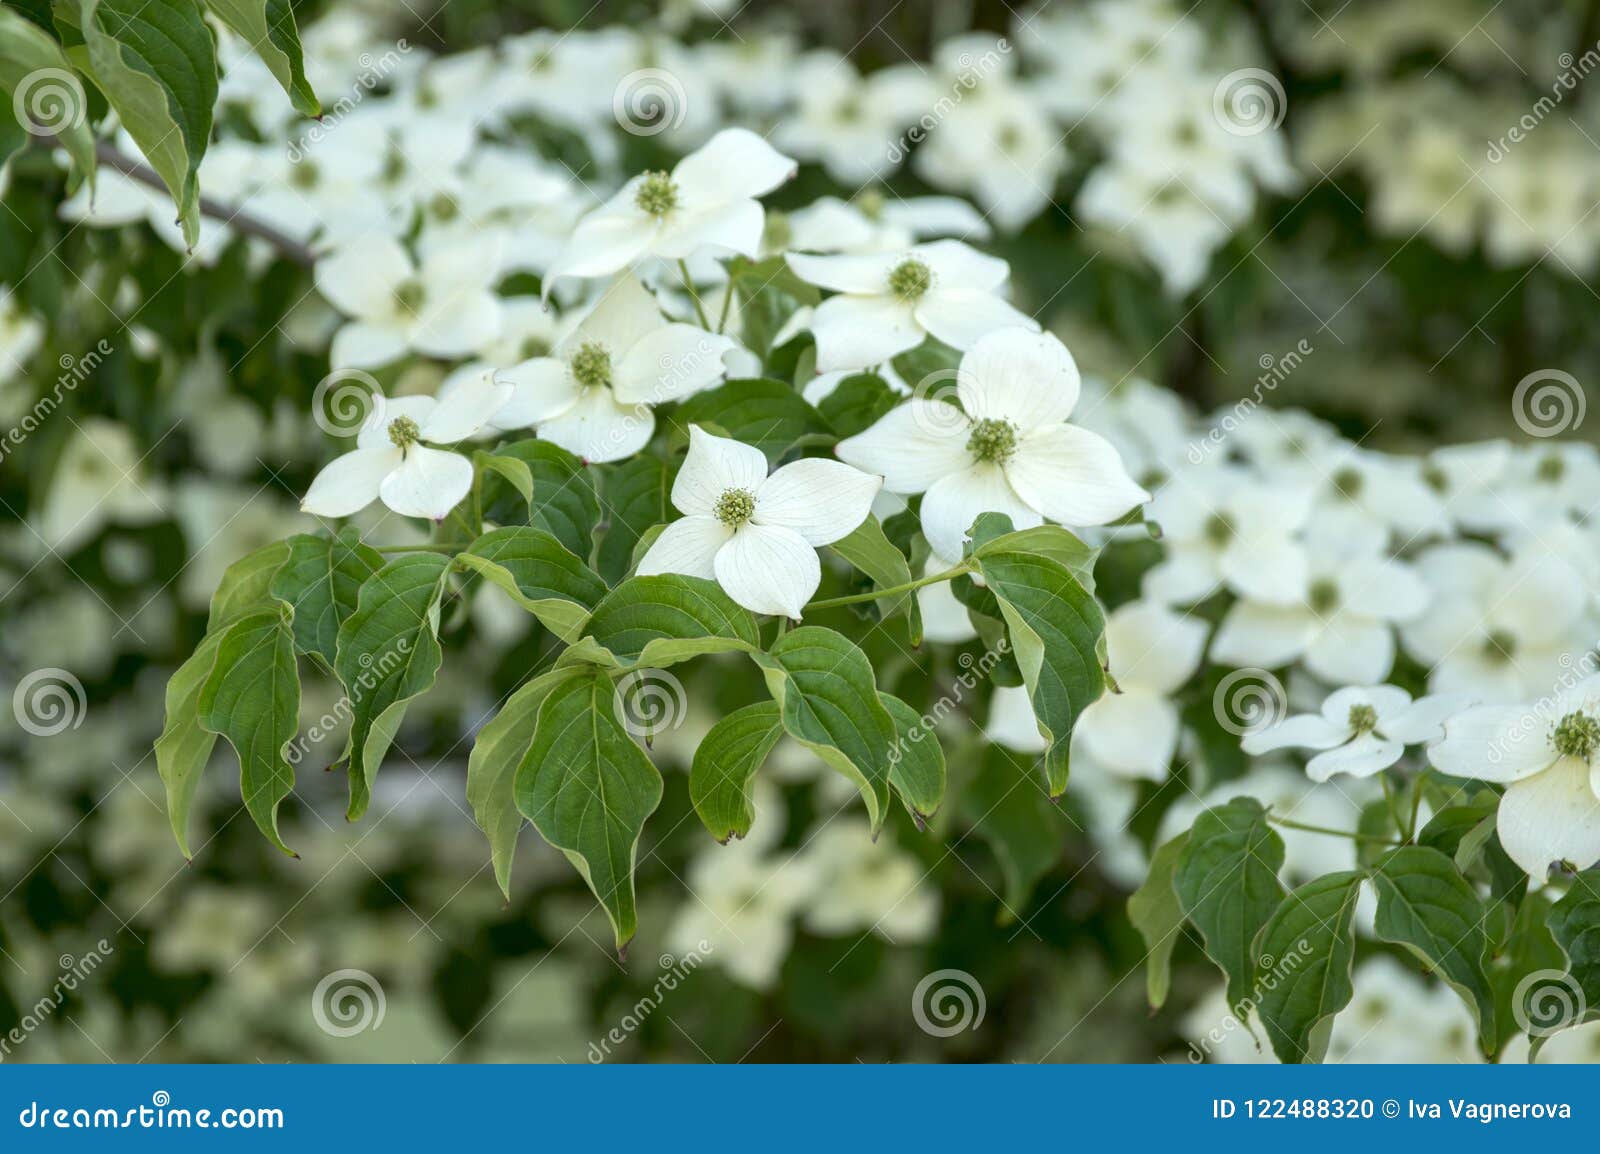 cornus kousa ornamental and beautiful flowering shrub, bright white flowers with four petals on blooming branches